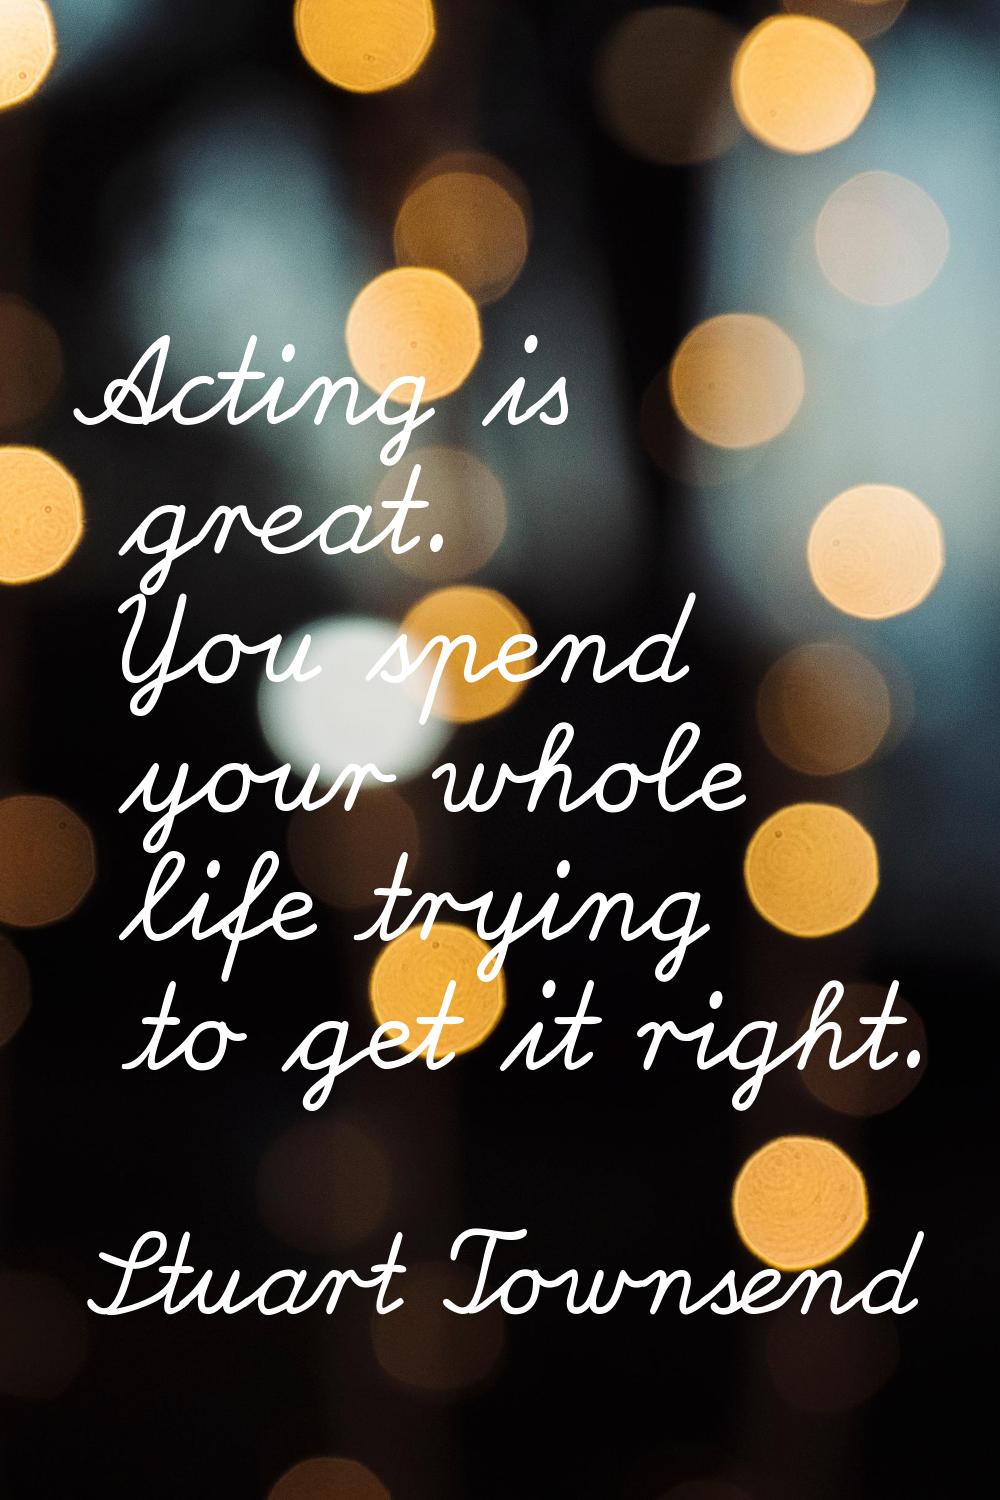 Acting is great. You spend your whole life trying to get it right.